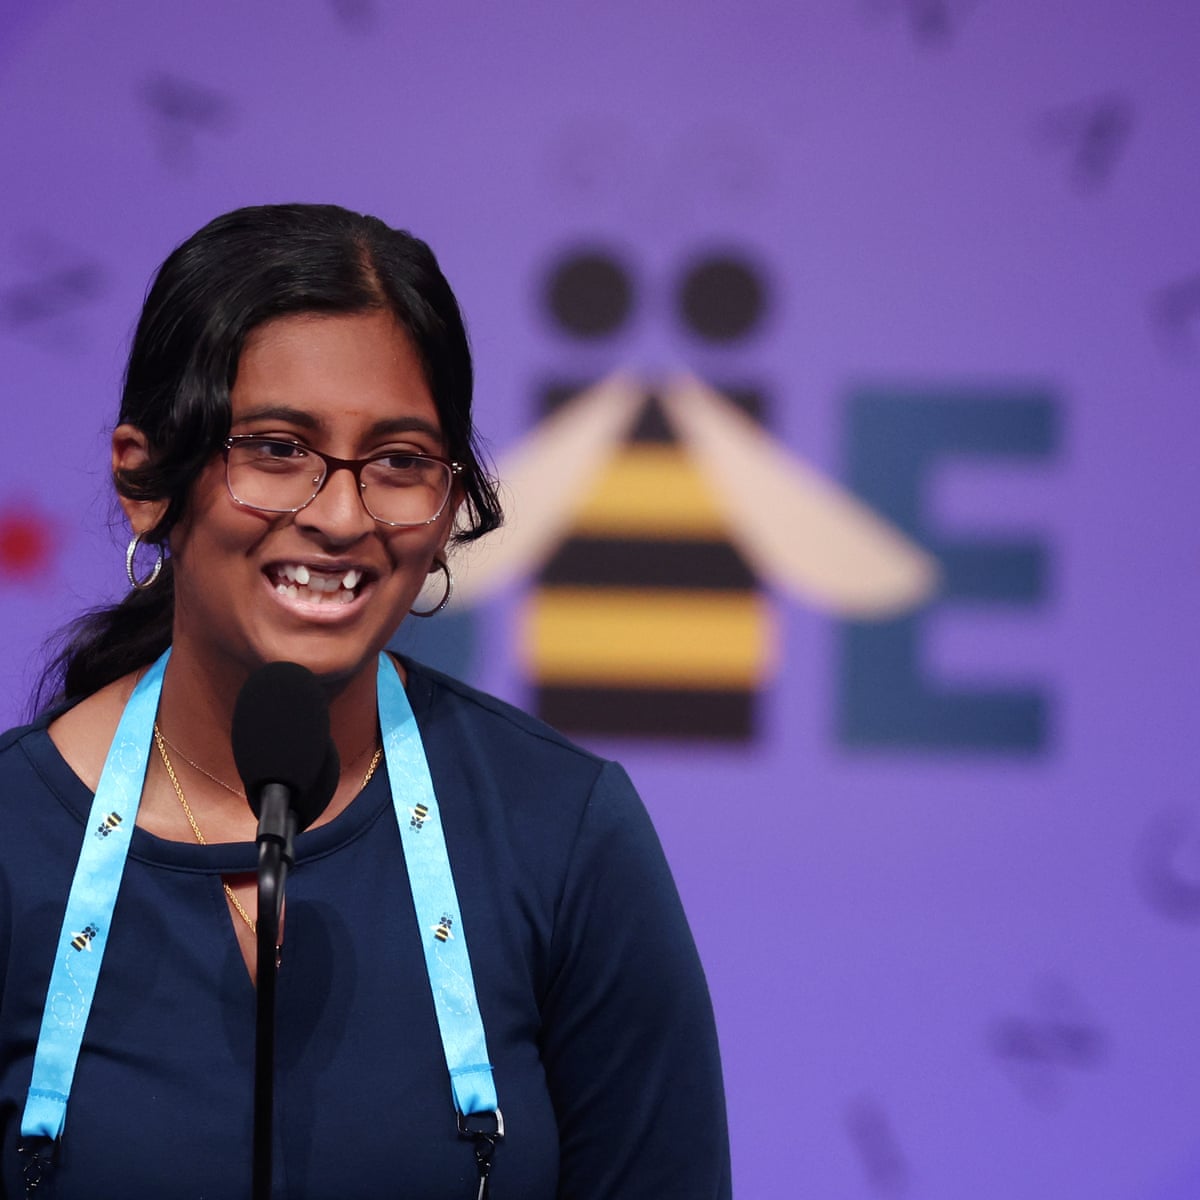 What do you win for the National Spelling Bee?